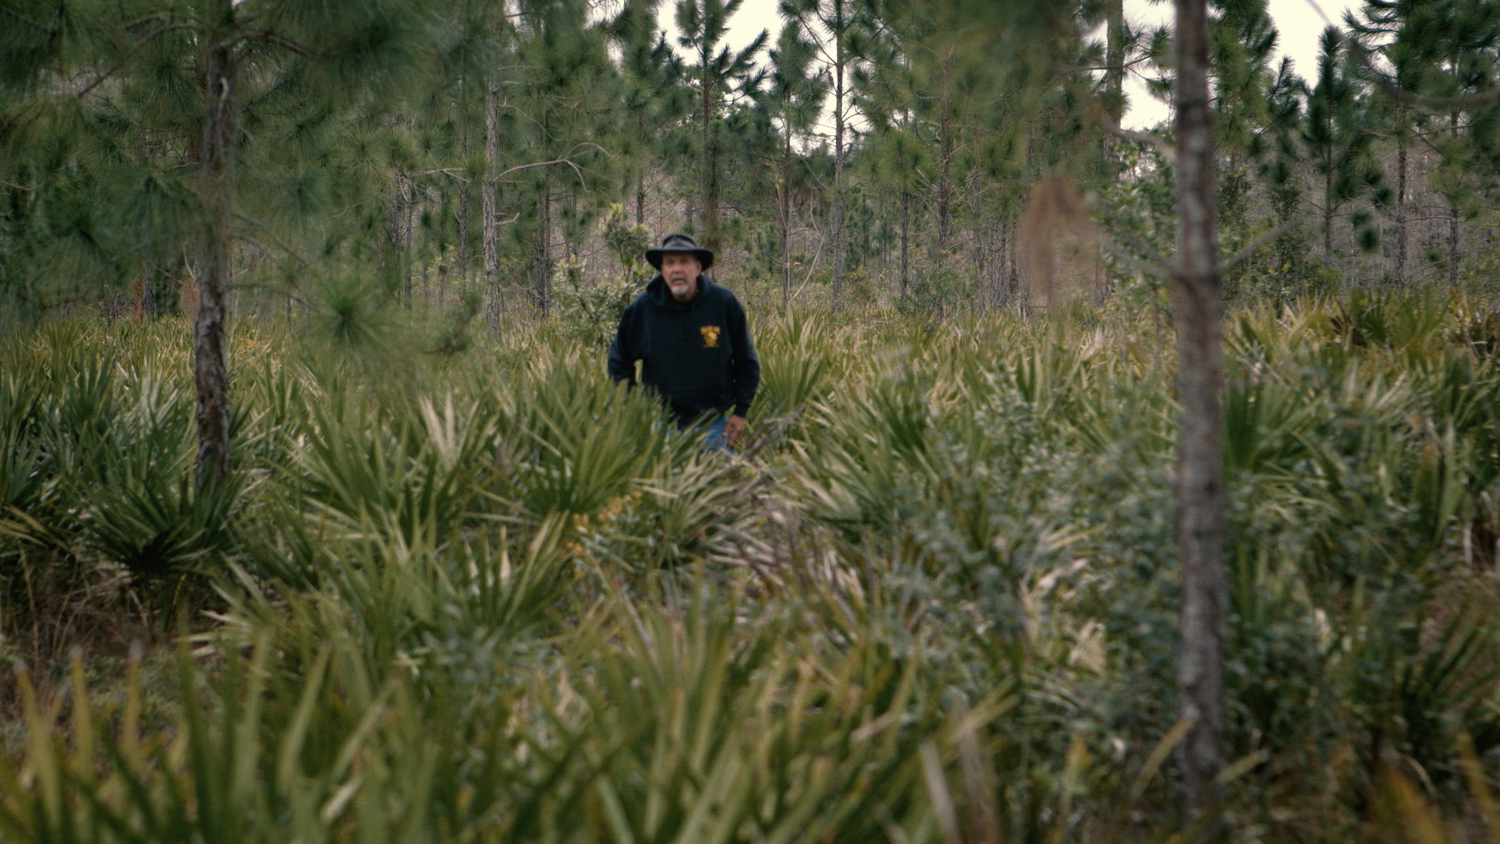 Dave Shealy wanders through the Everglades in this still from 'Swan Song'.